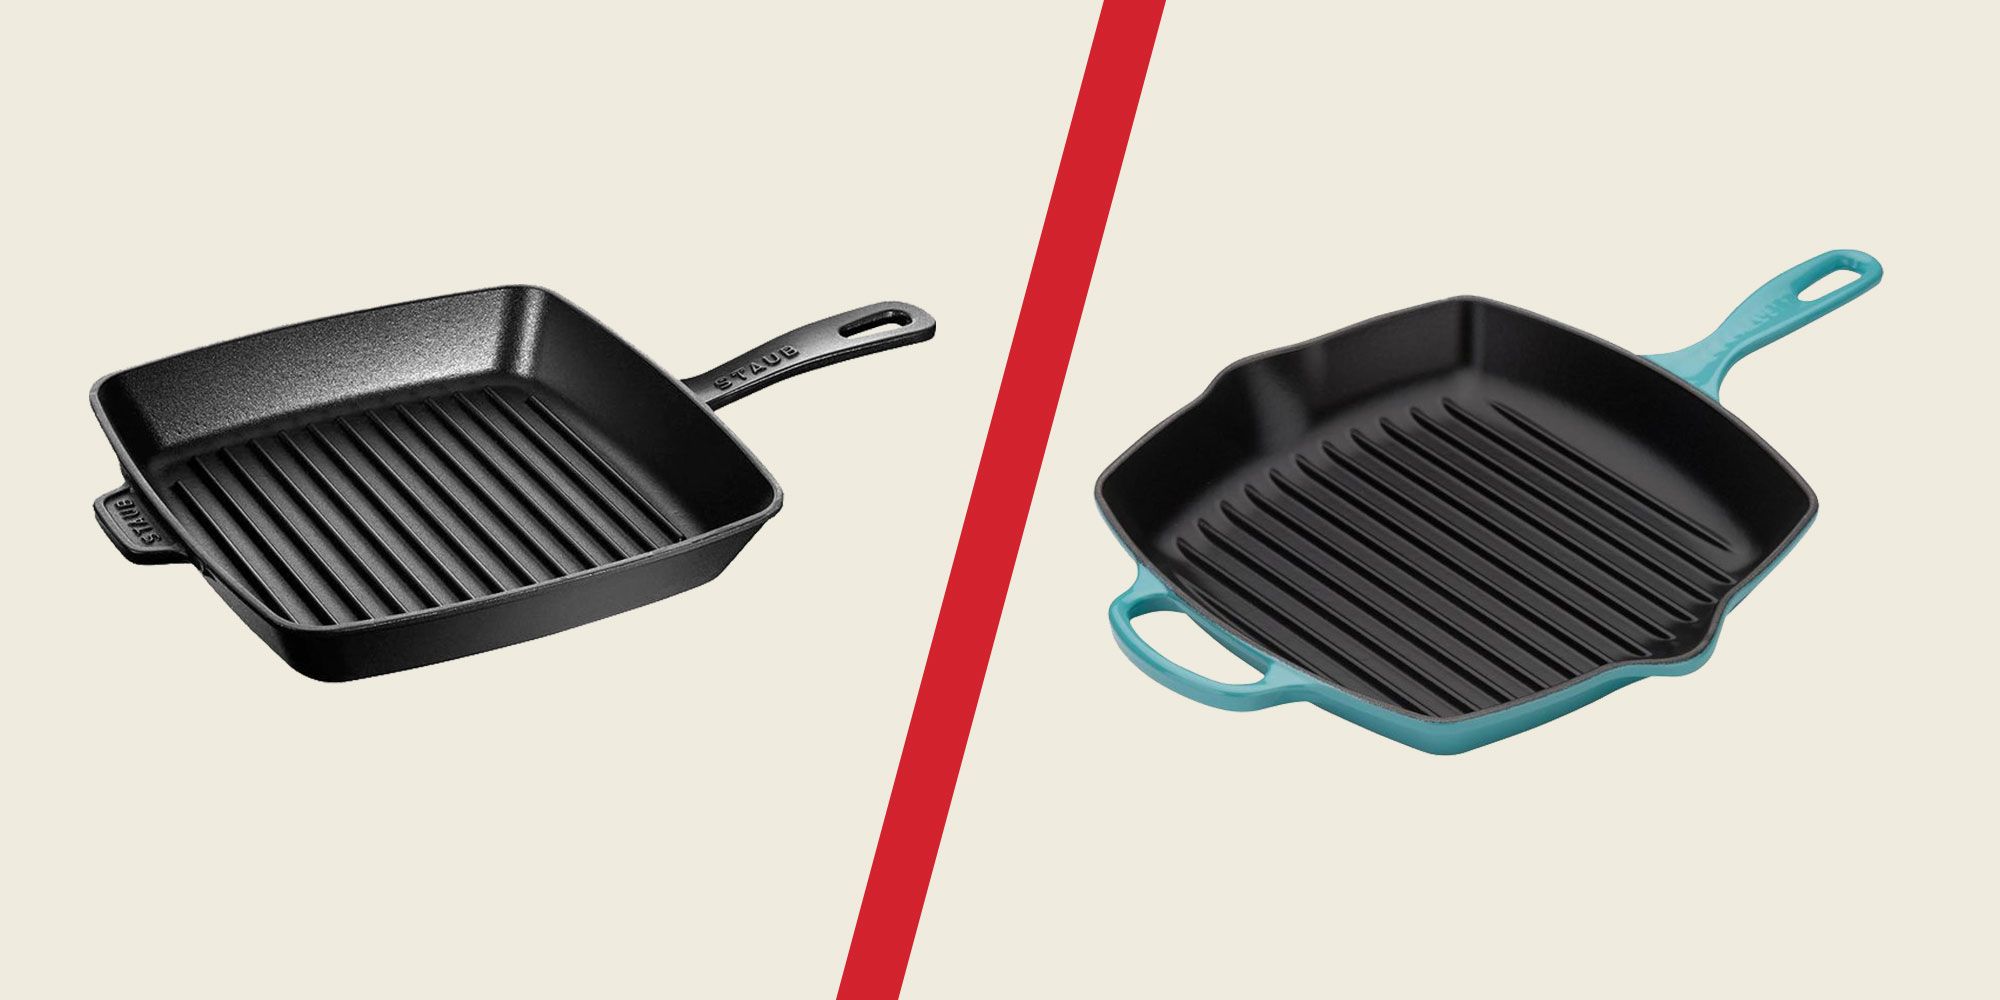 Best griddle pans 2020: 10 top grill pans to use in the kitchen